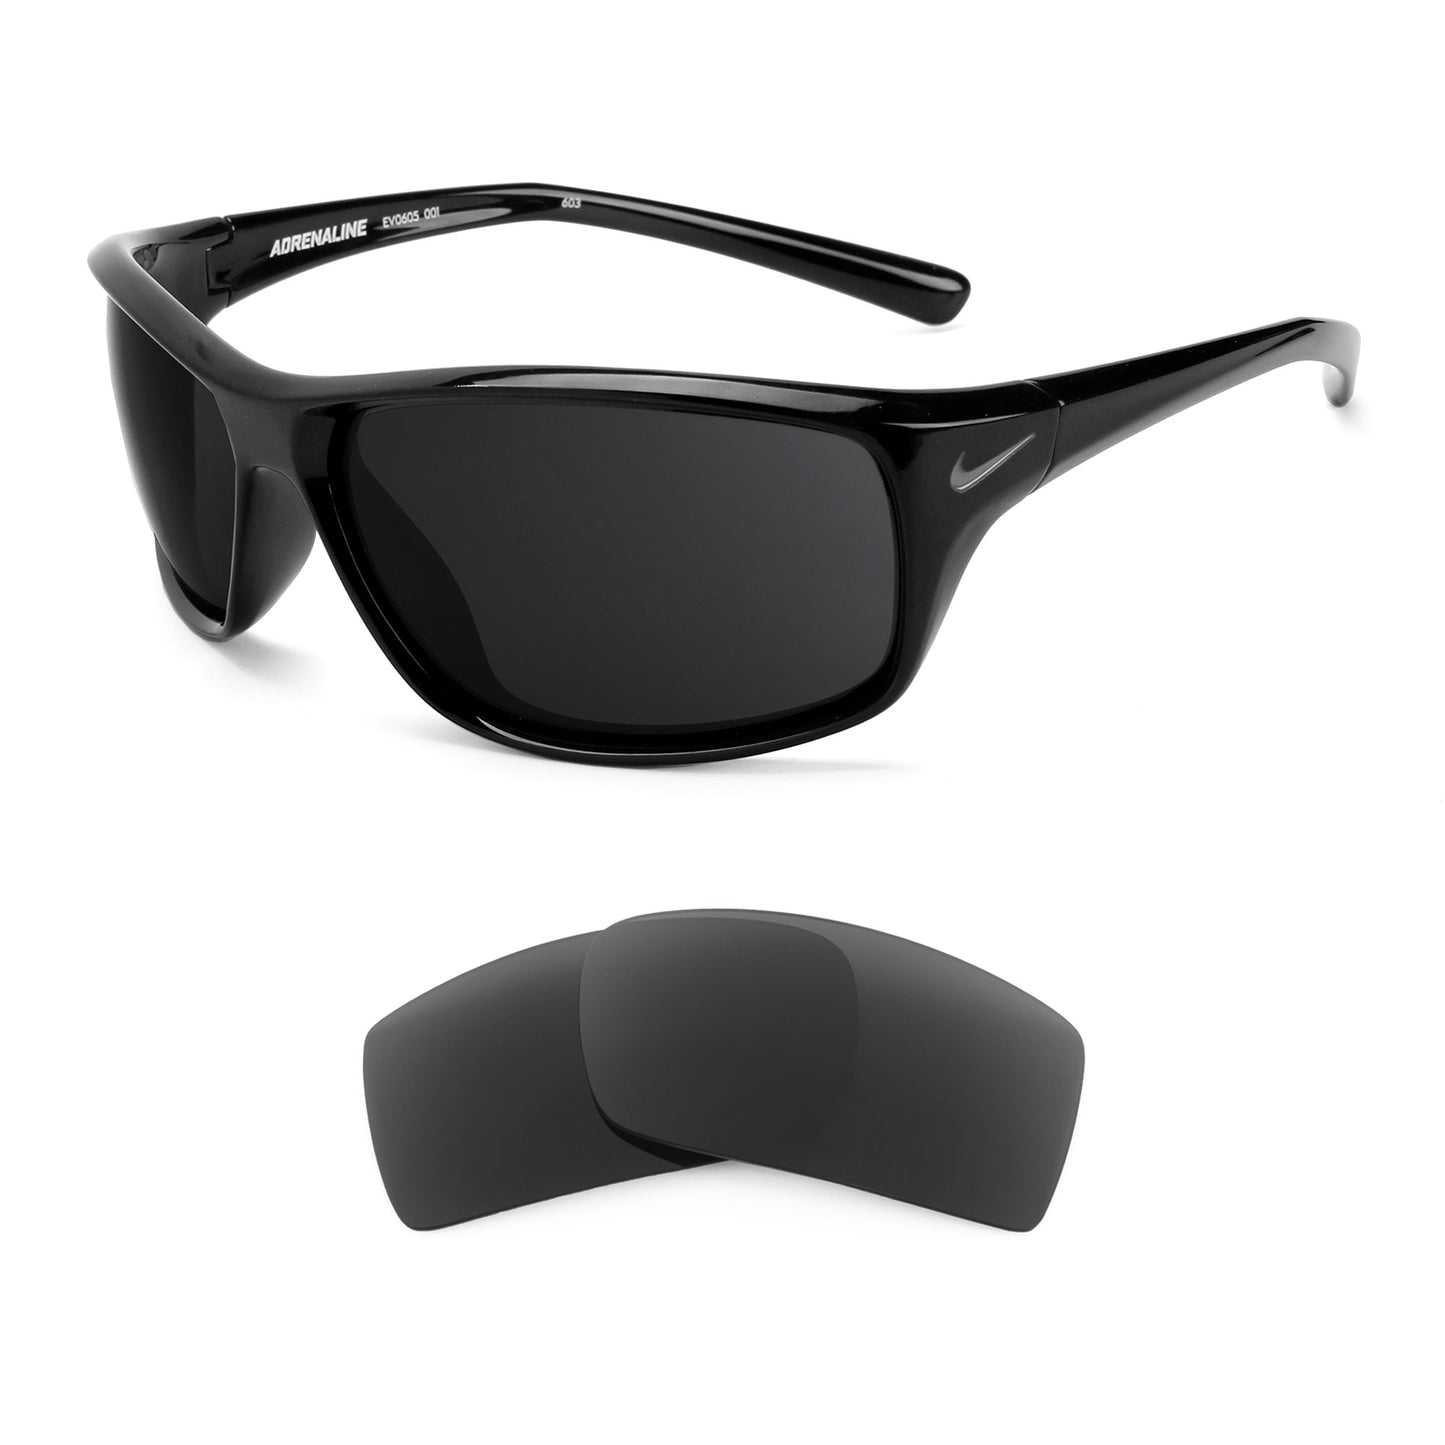 Nike Adrenaline sunglasses with replacement lenses